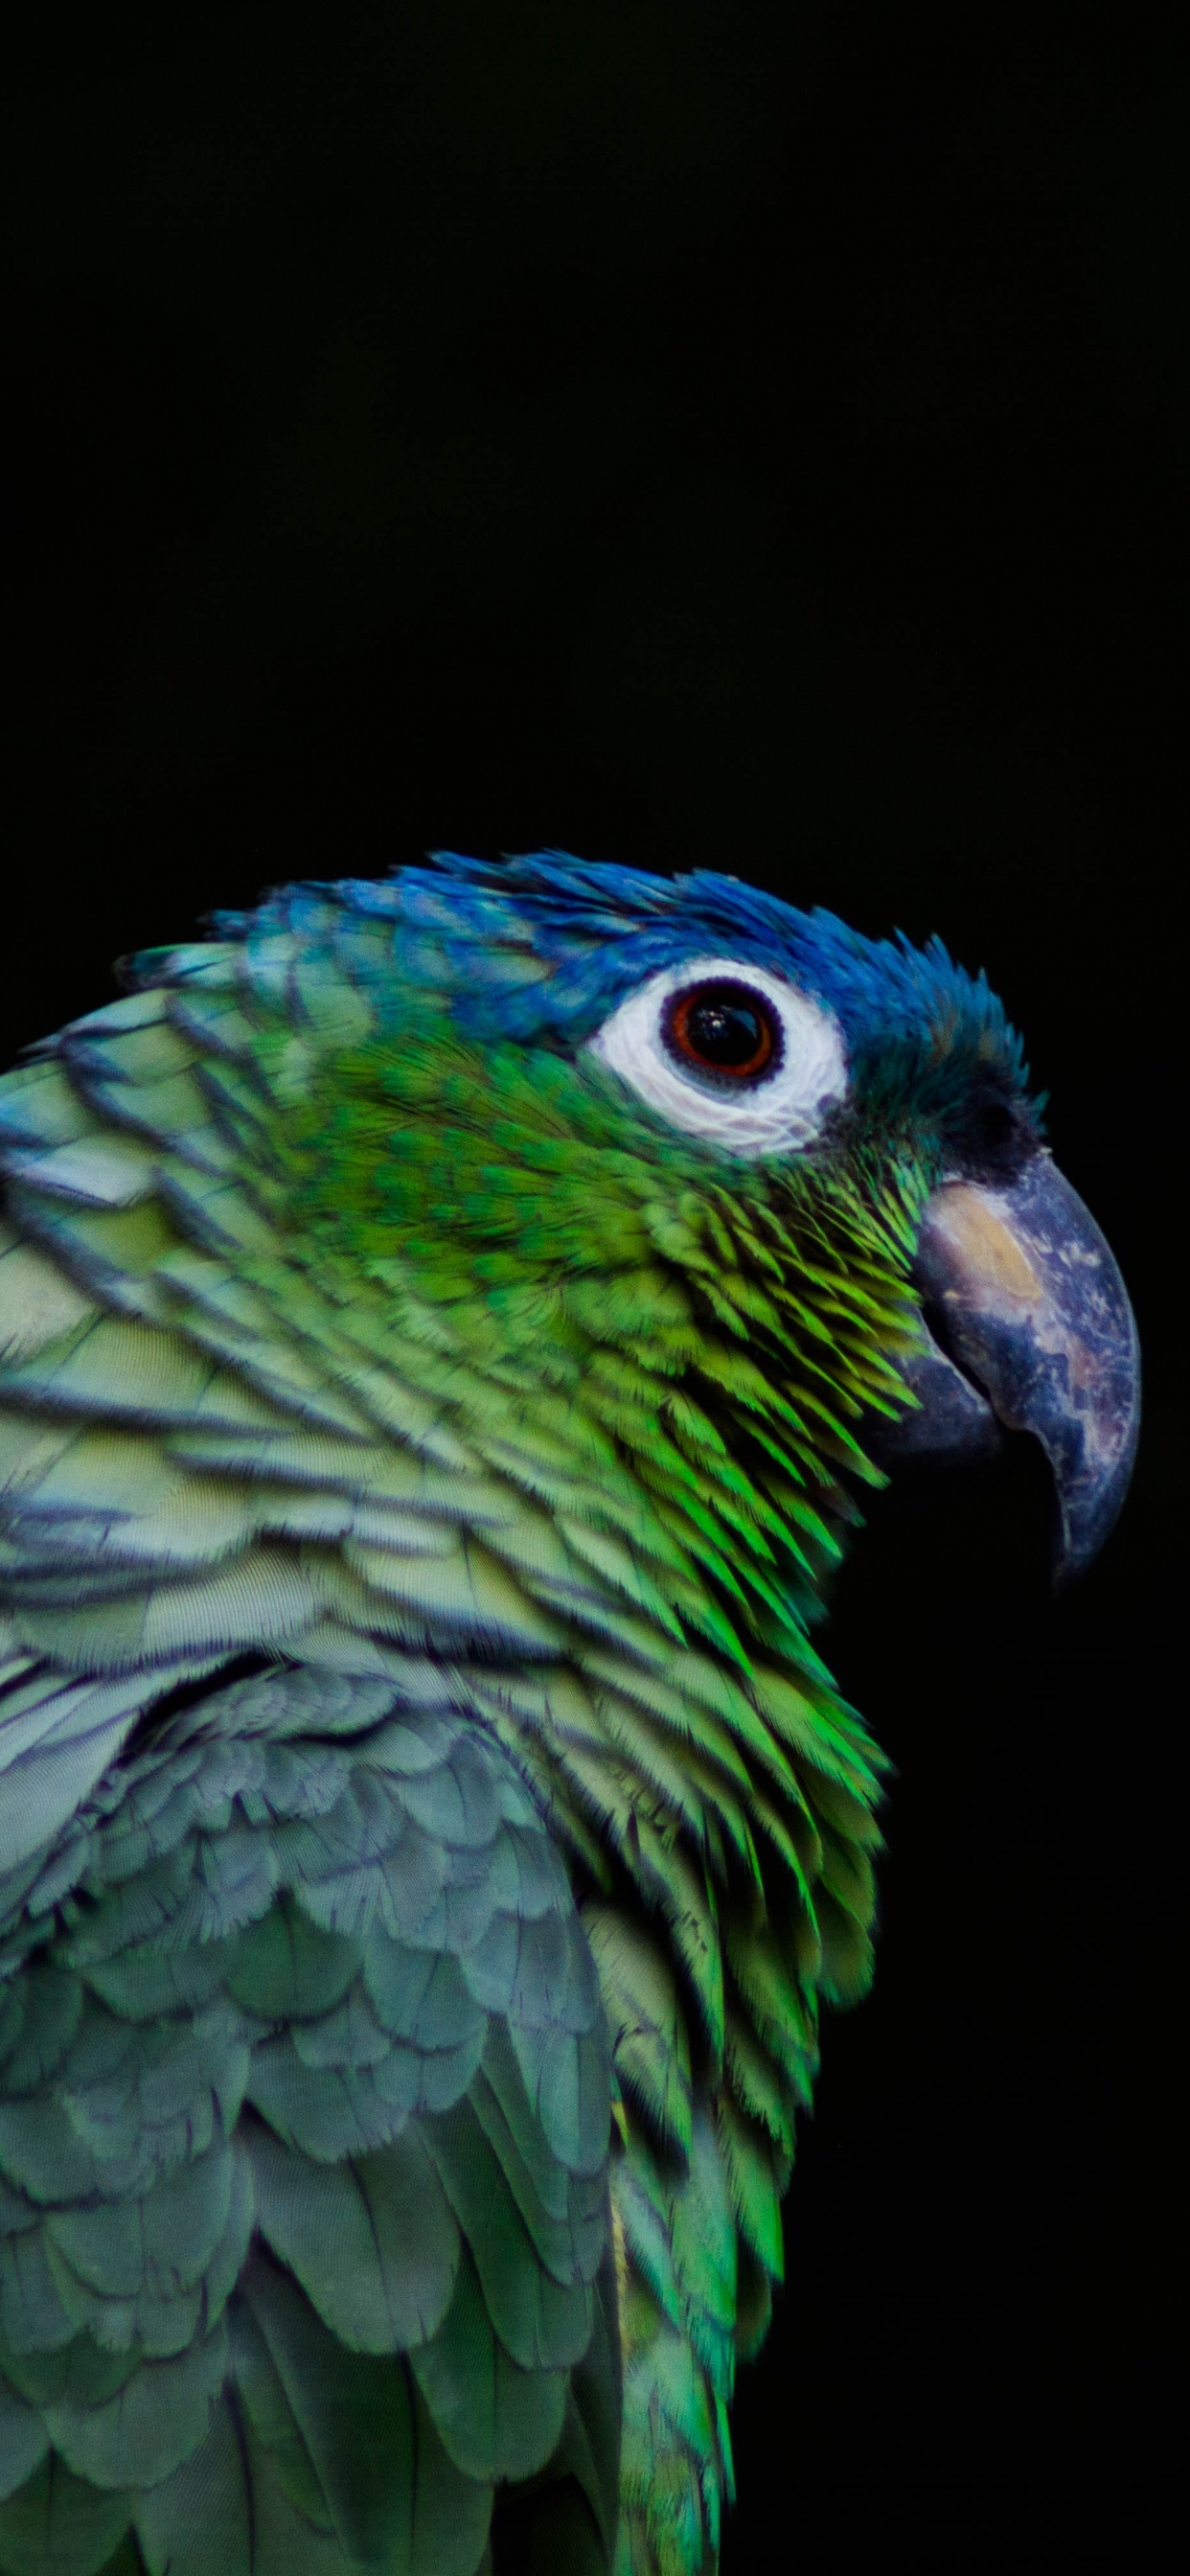 Green and Blue Parrot in Close up Photography. Wallpaper in 1242x2688 Resolution